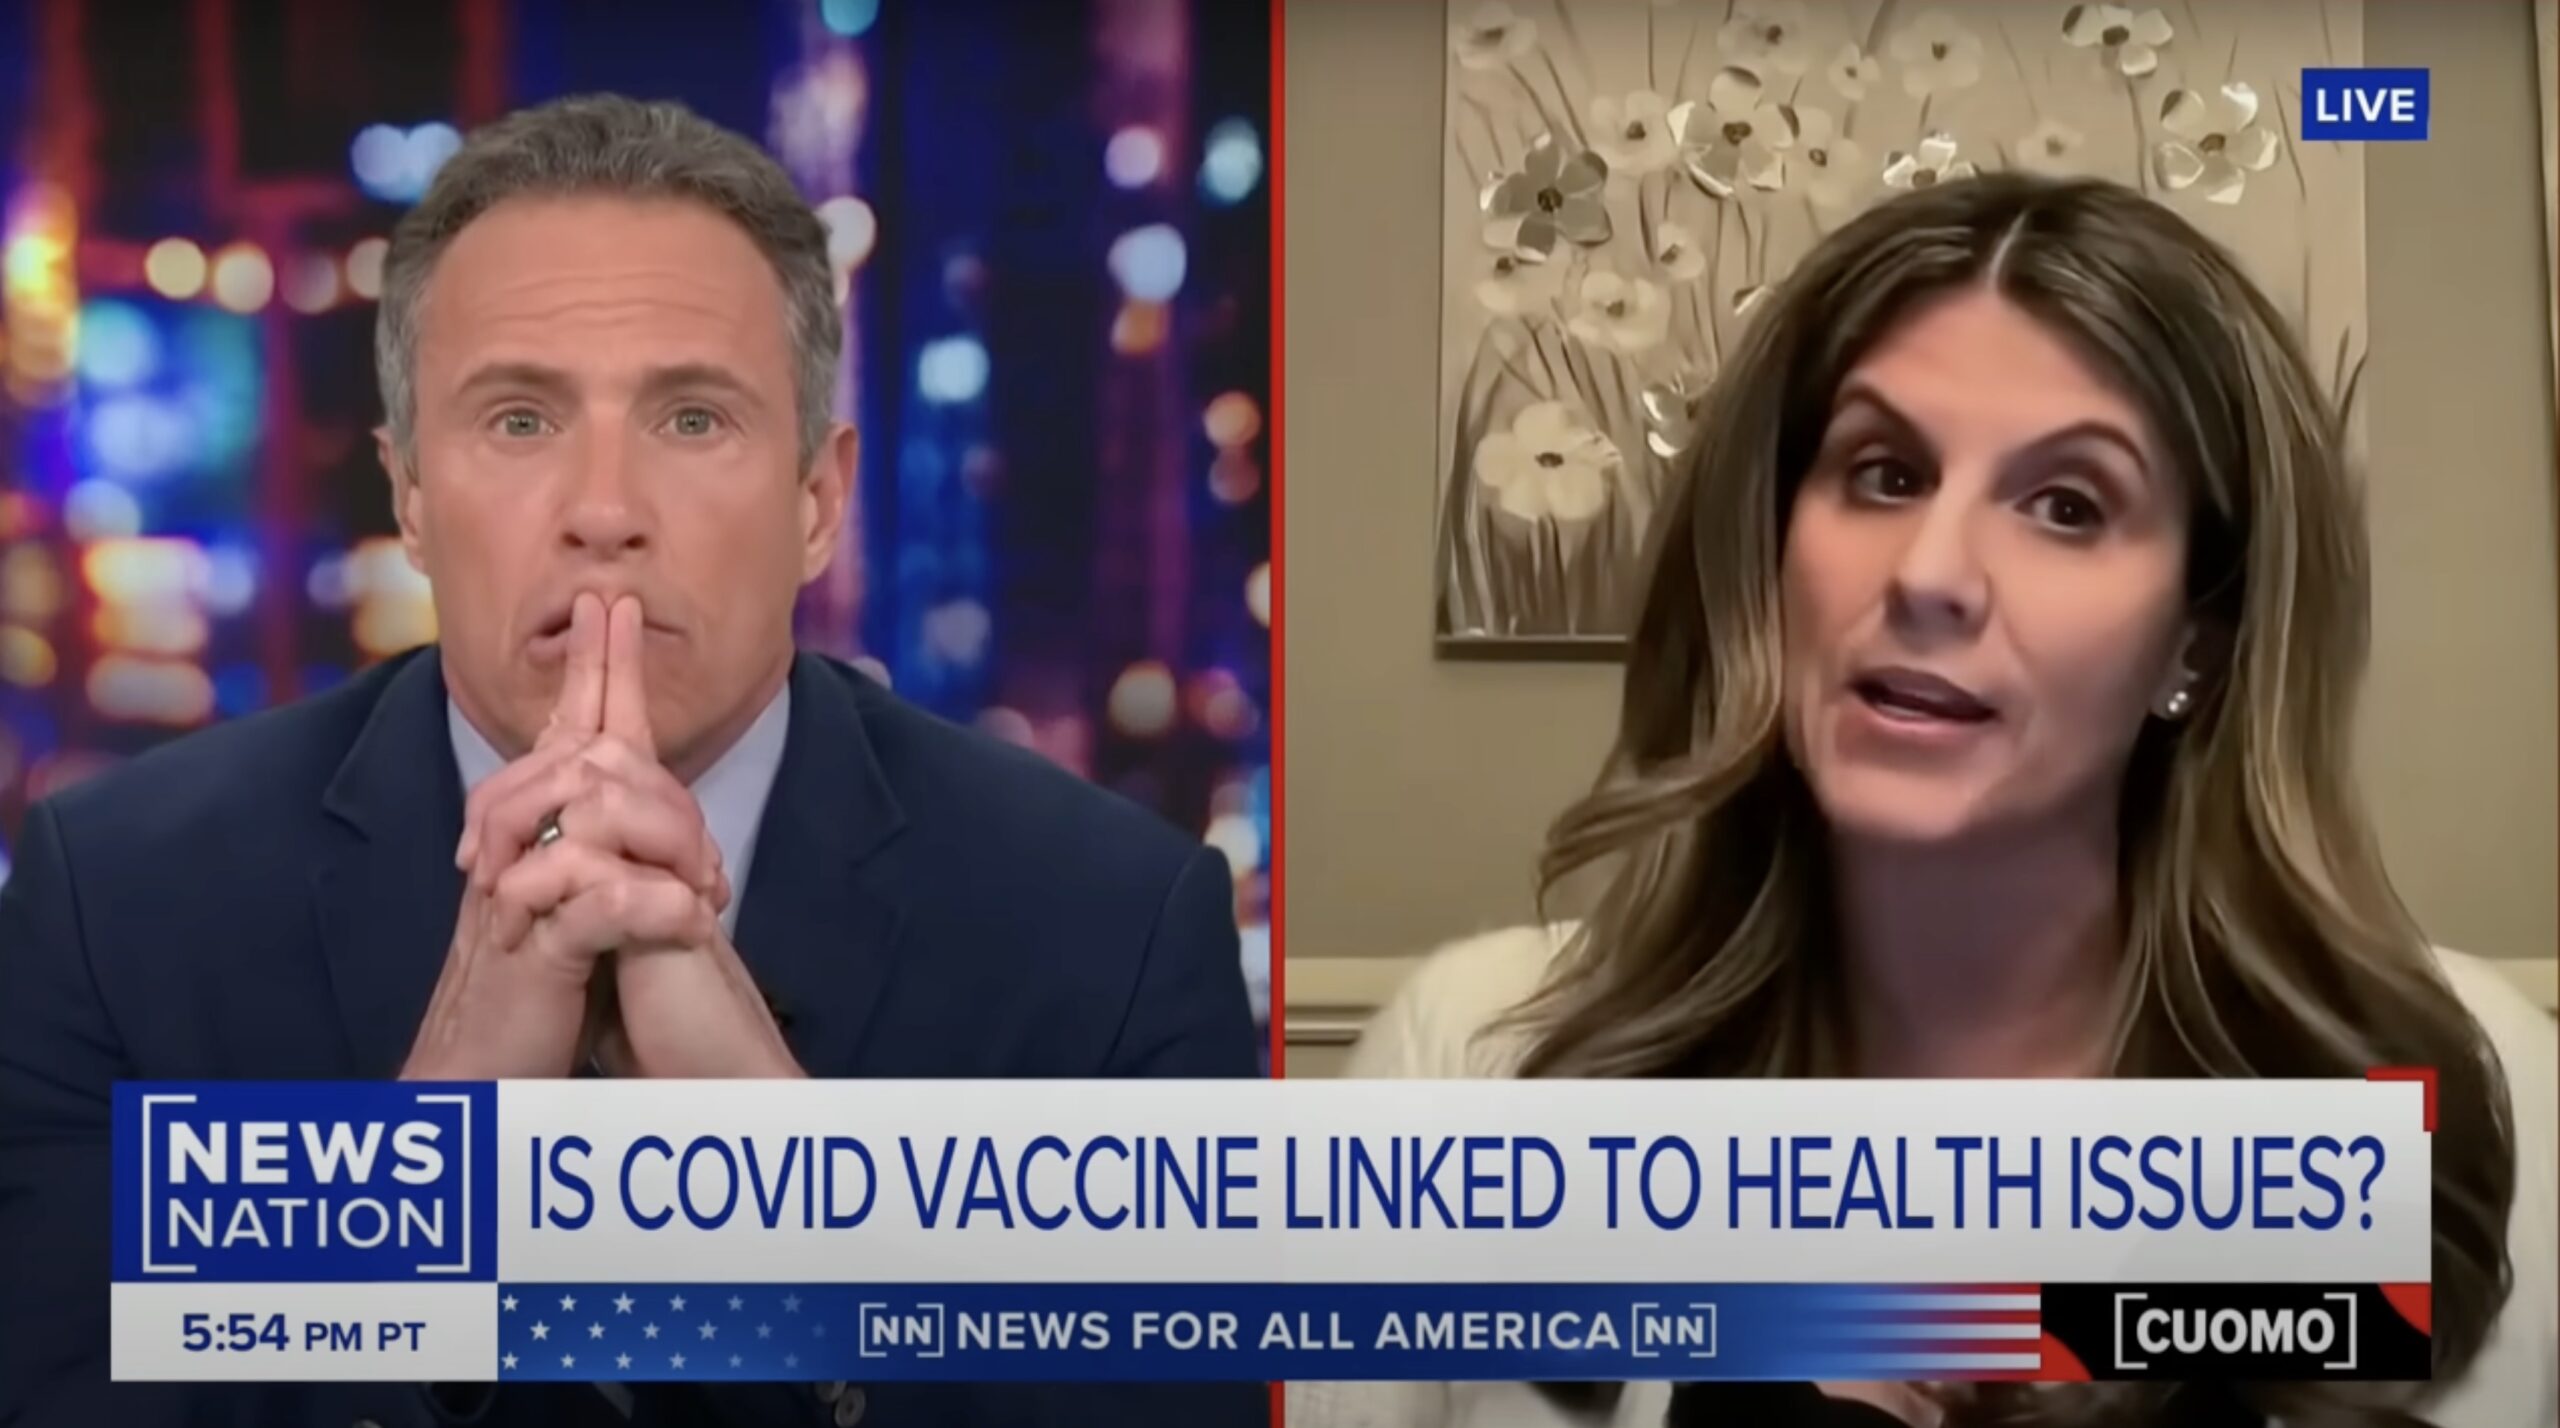 Chris Cuomo’s Personal Physician Destroys COVID-19 ‘Safe & Effective’ Narrative on Live TV (VIDEO) | The Gateway Pundit